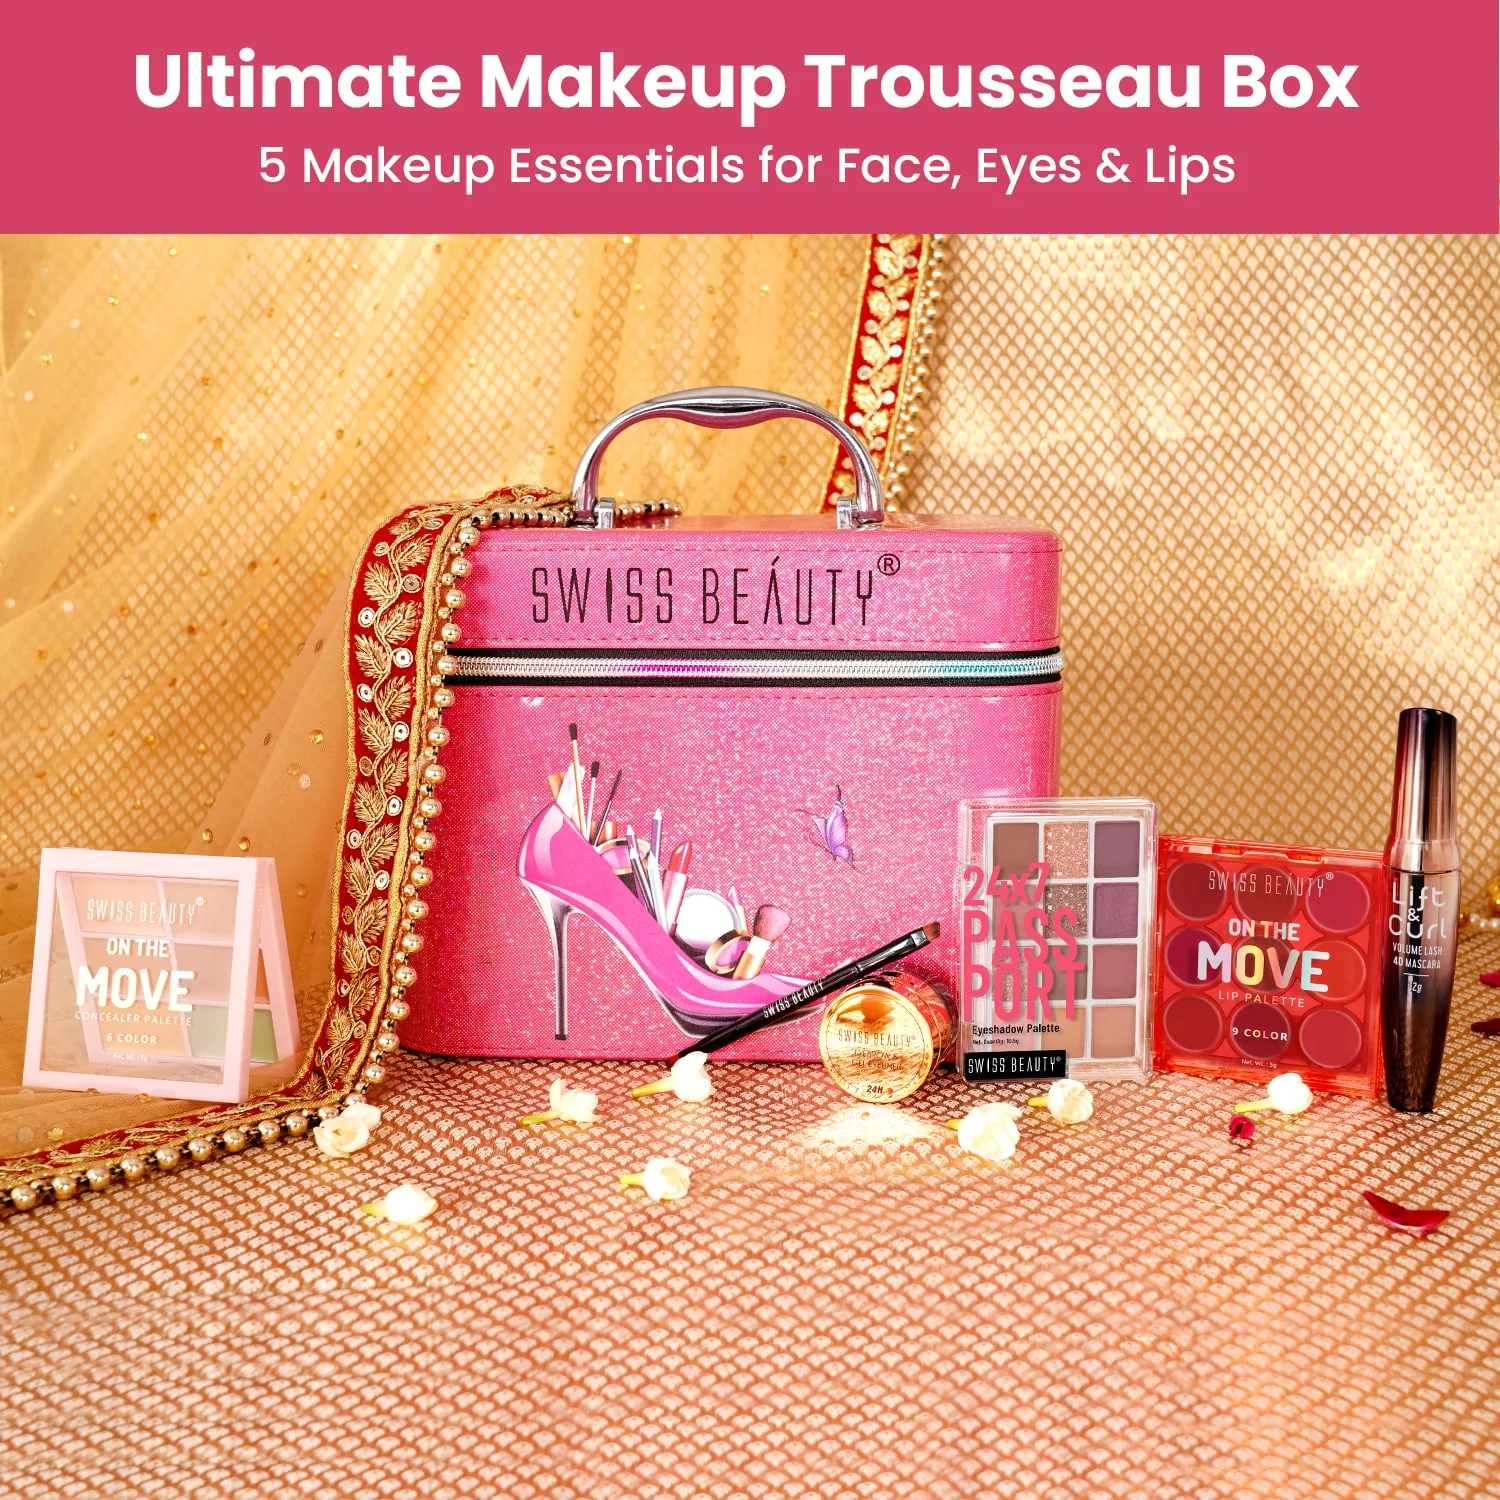 SWISS BEAUTY ULTIMATE MAKEUP TROUSSEAU BOX WITH FREE TRUNK VANITY